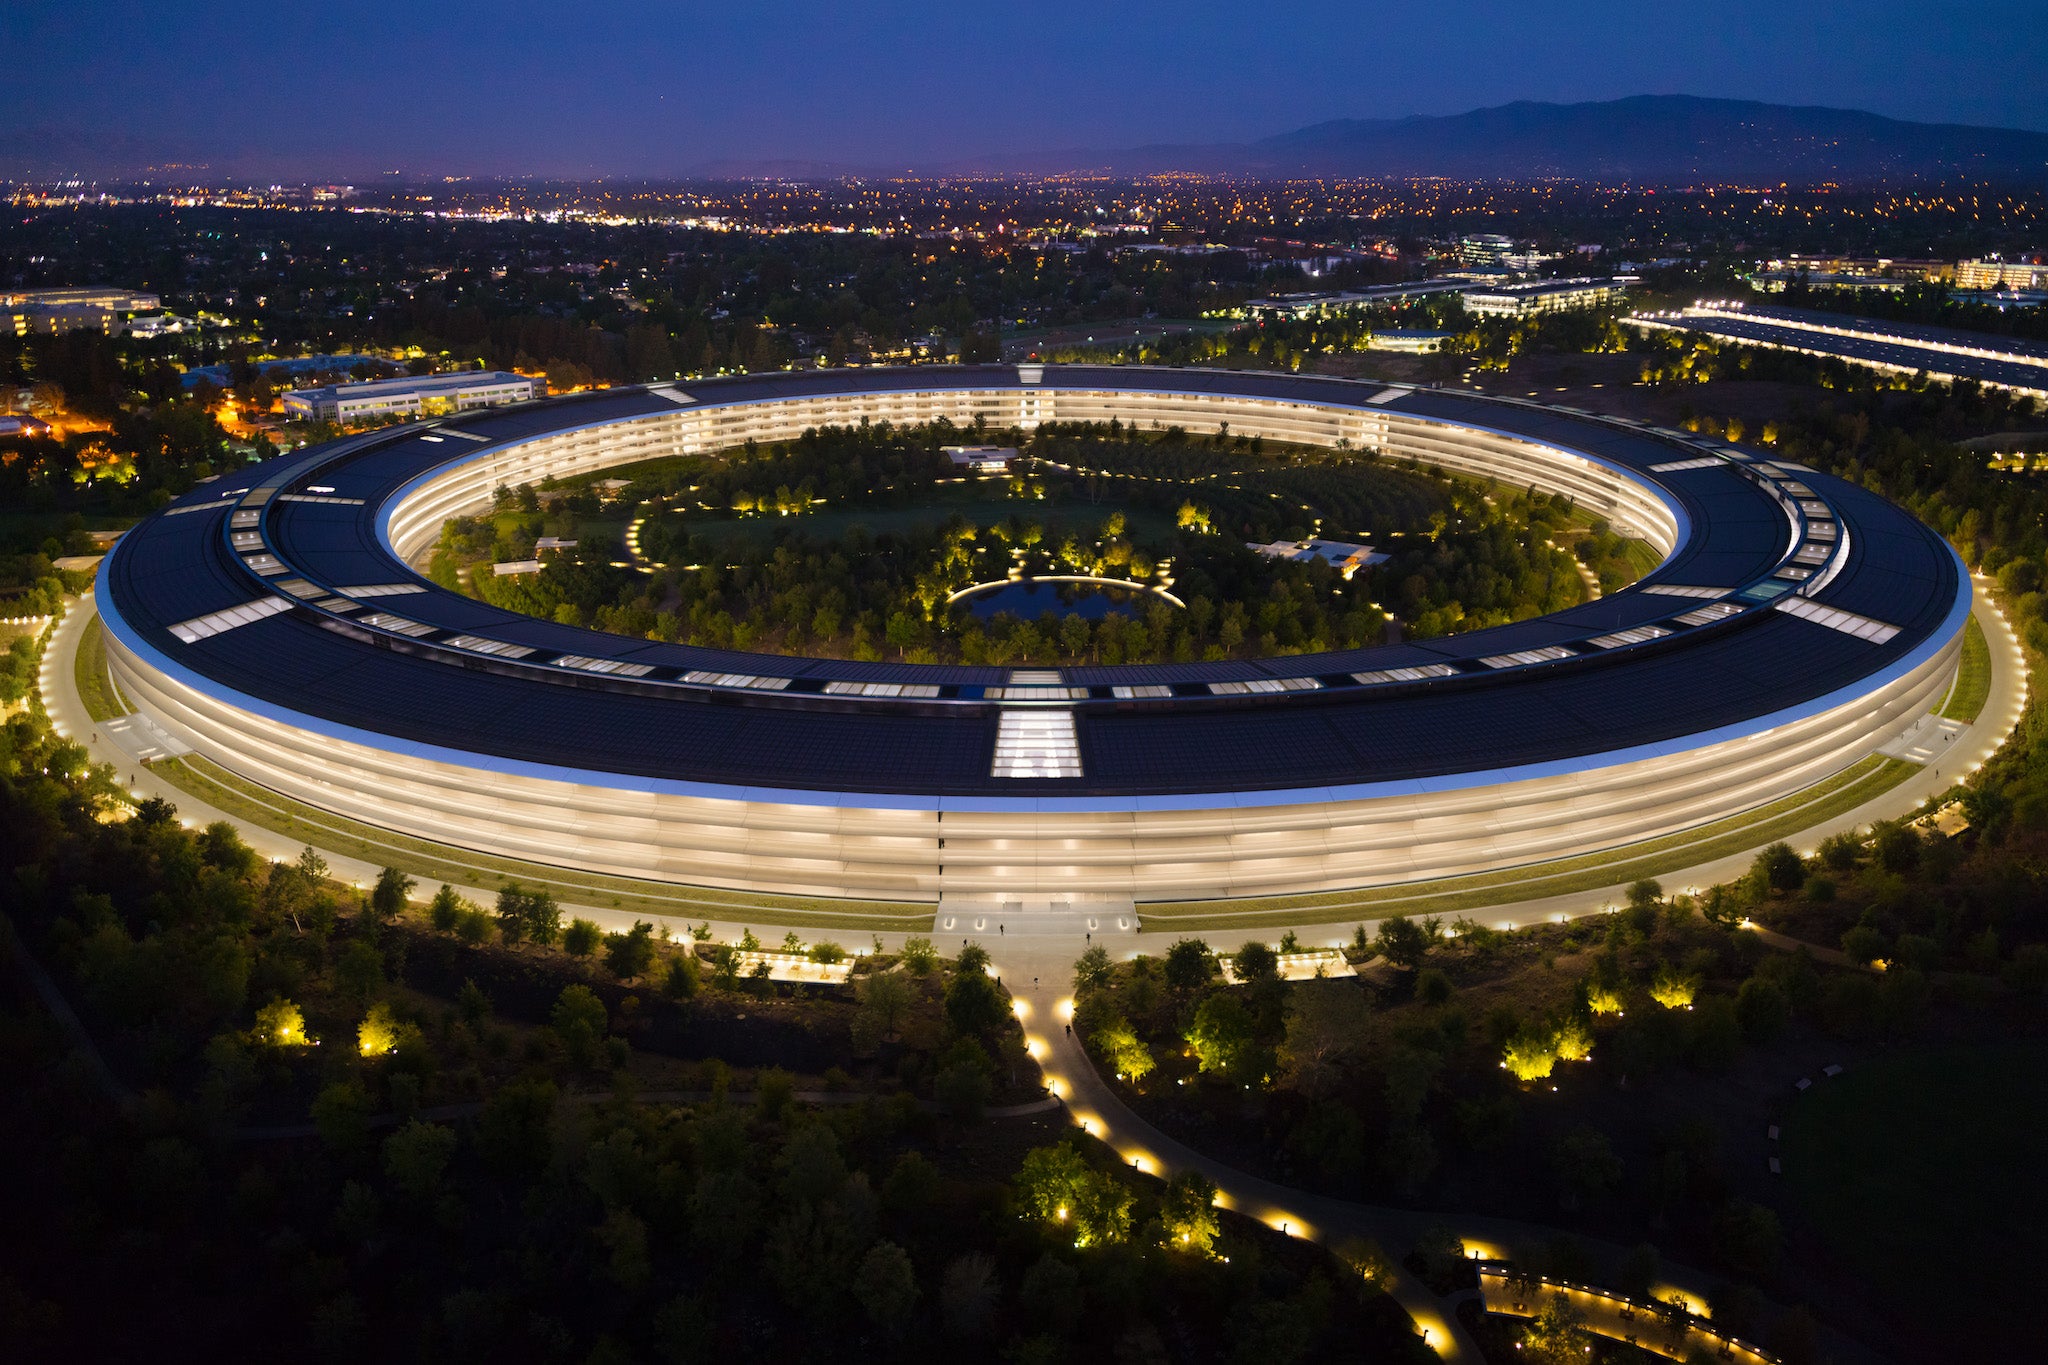 The futuristic Apple Park, which opened to employees in 2017